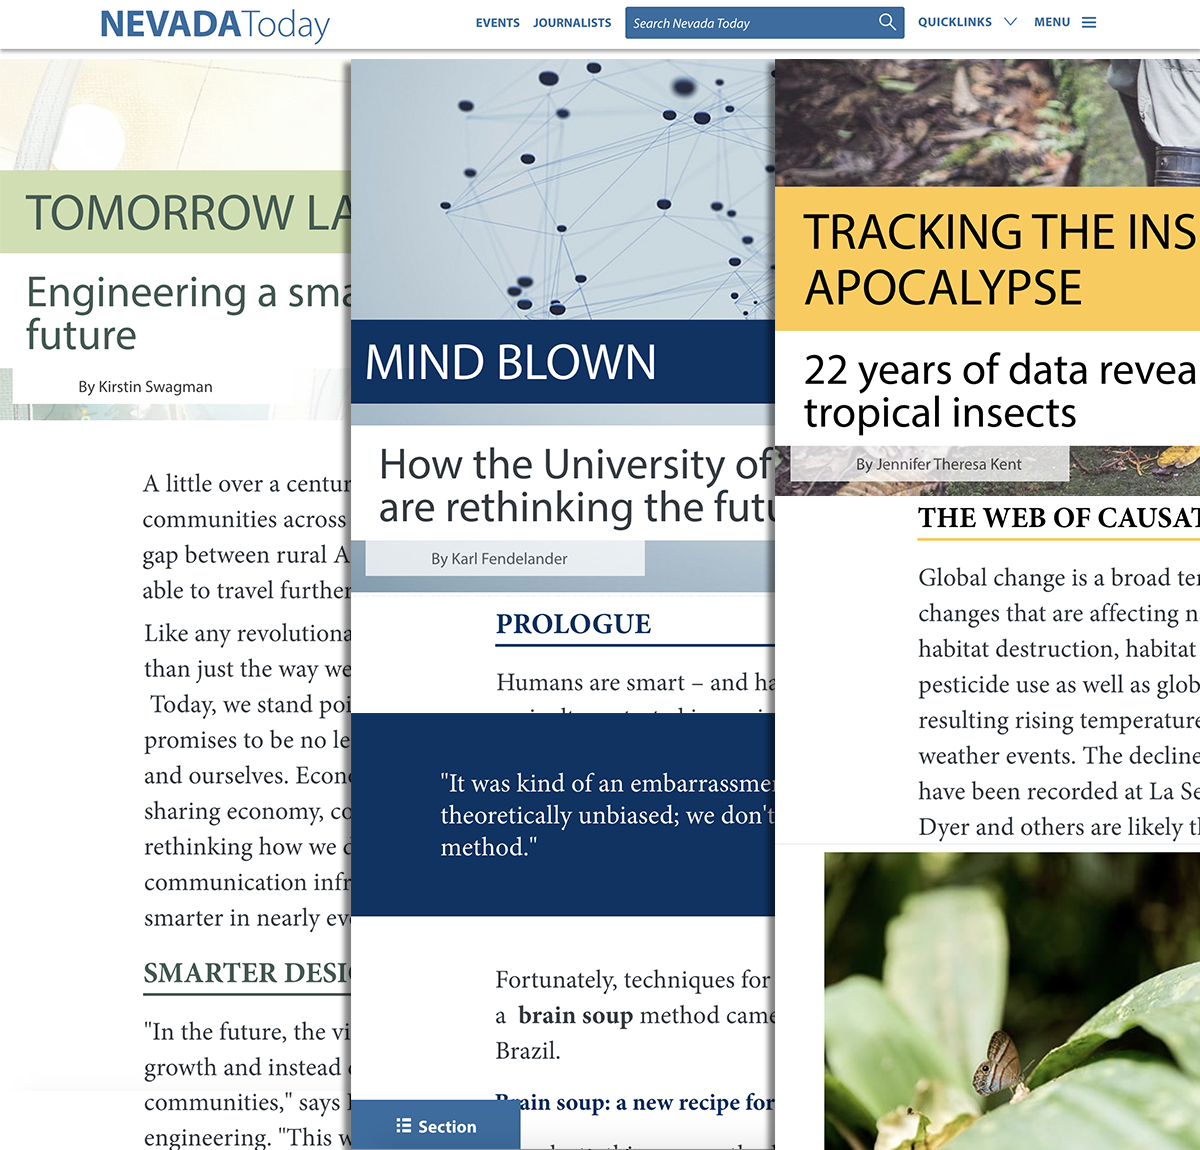 NevadaToday Article Page Design and Layout